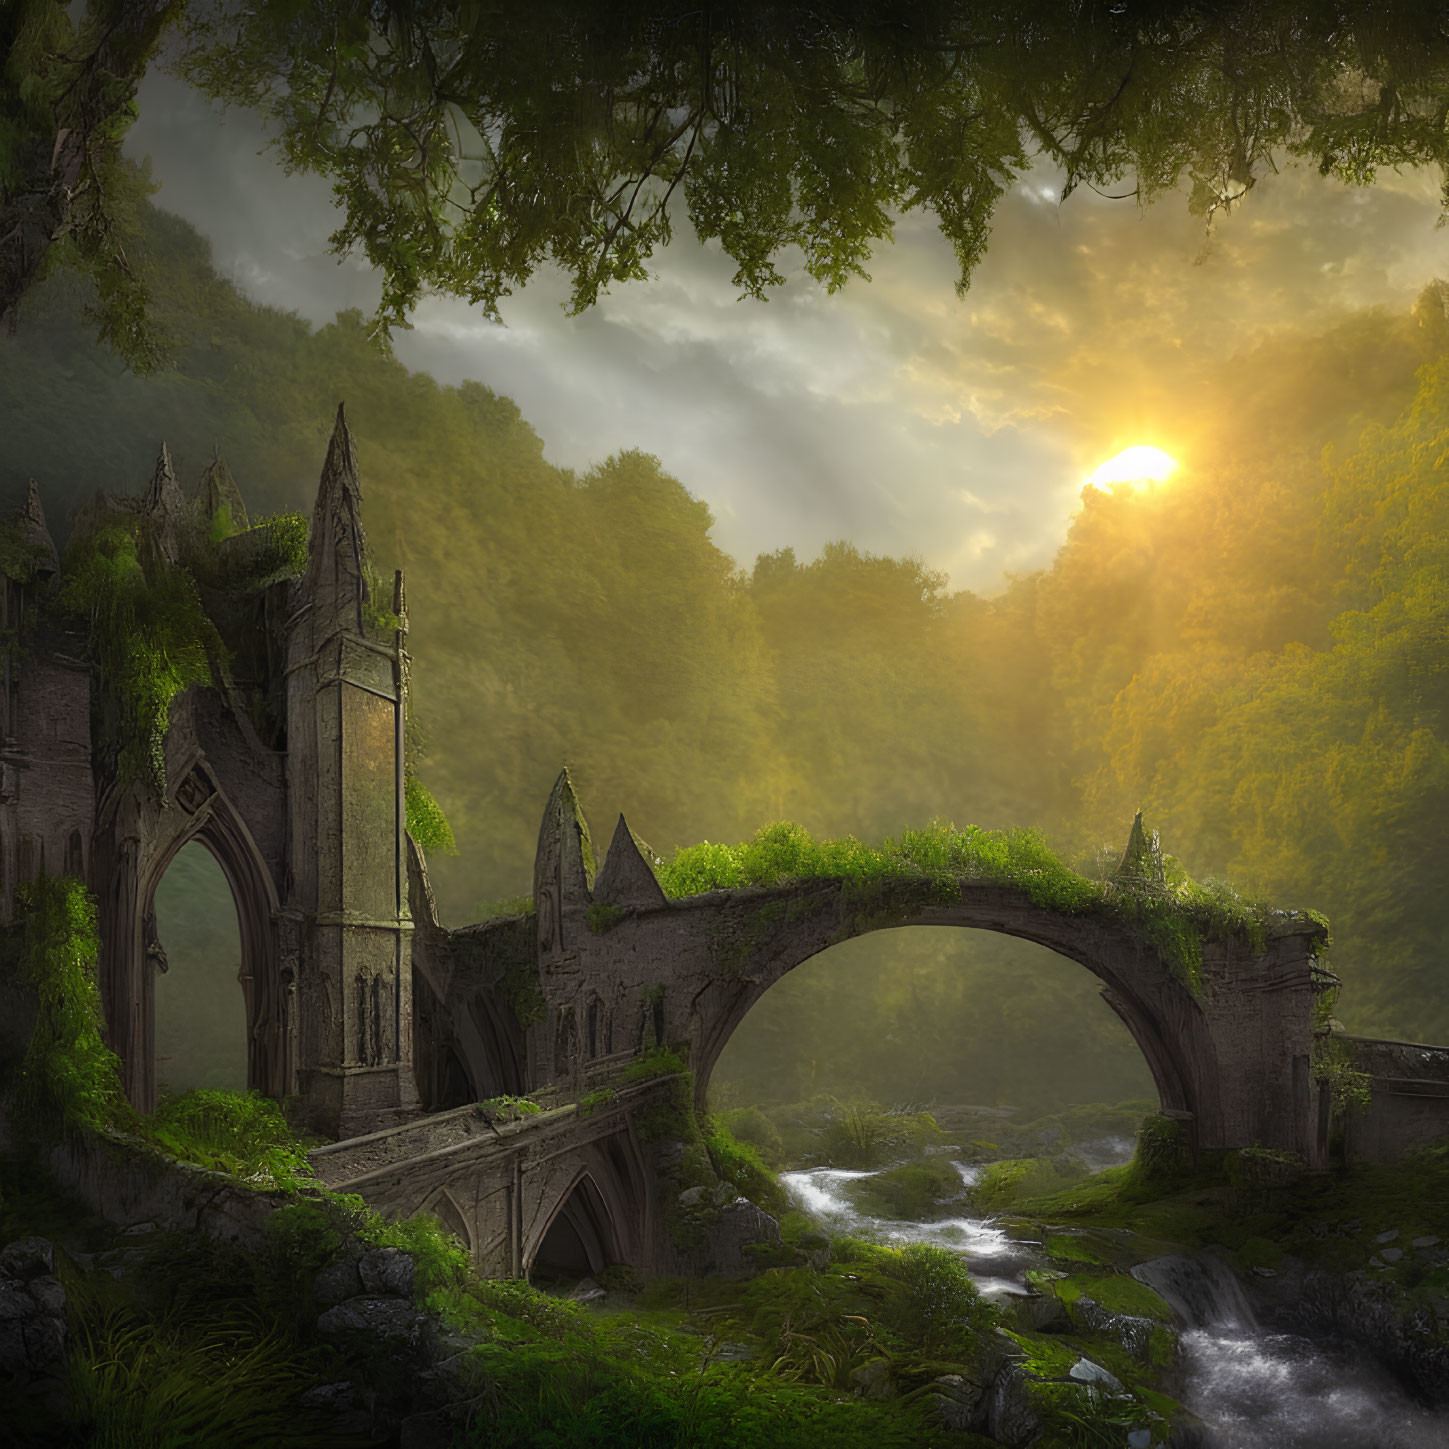 Stone bridge with Gothic arches in sunlit forest crossing stream